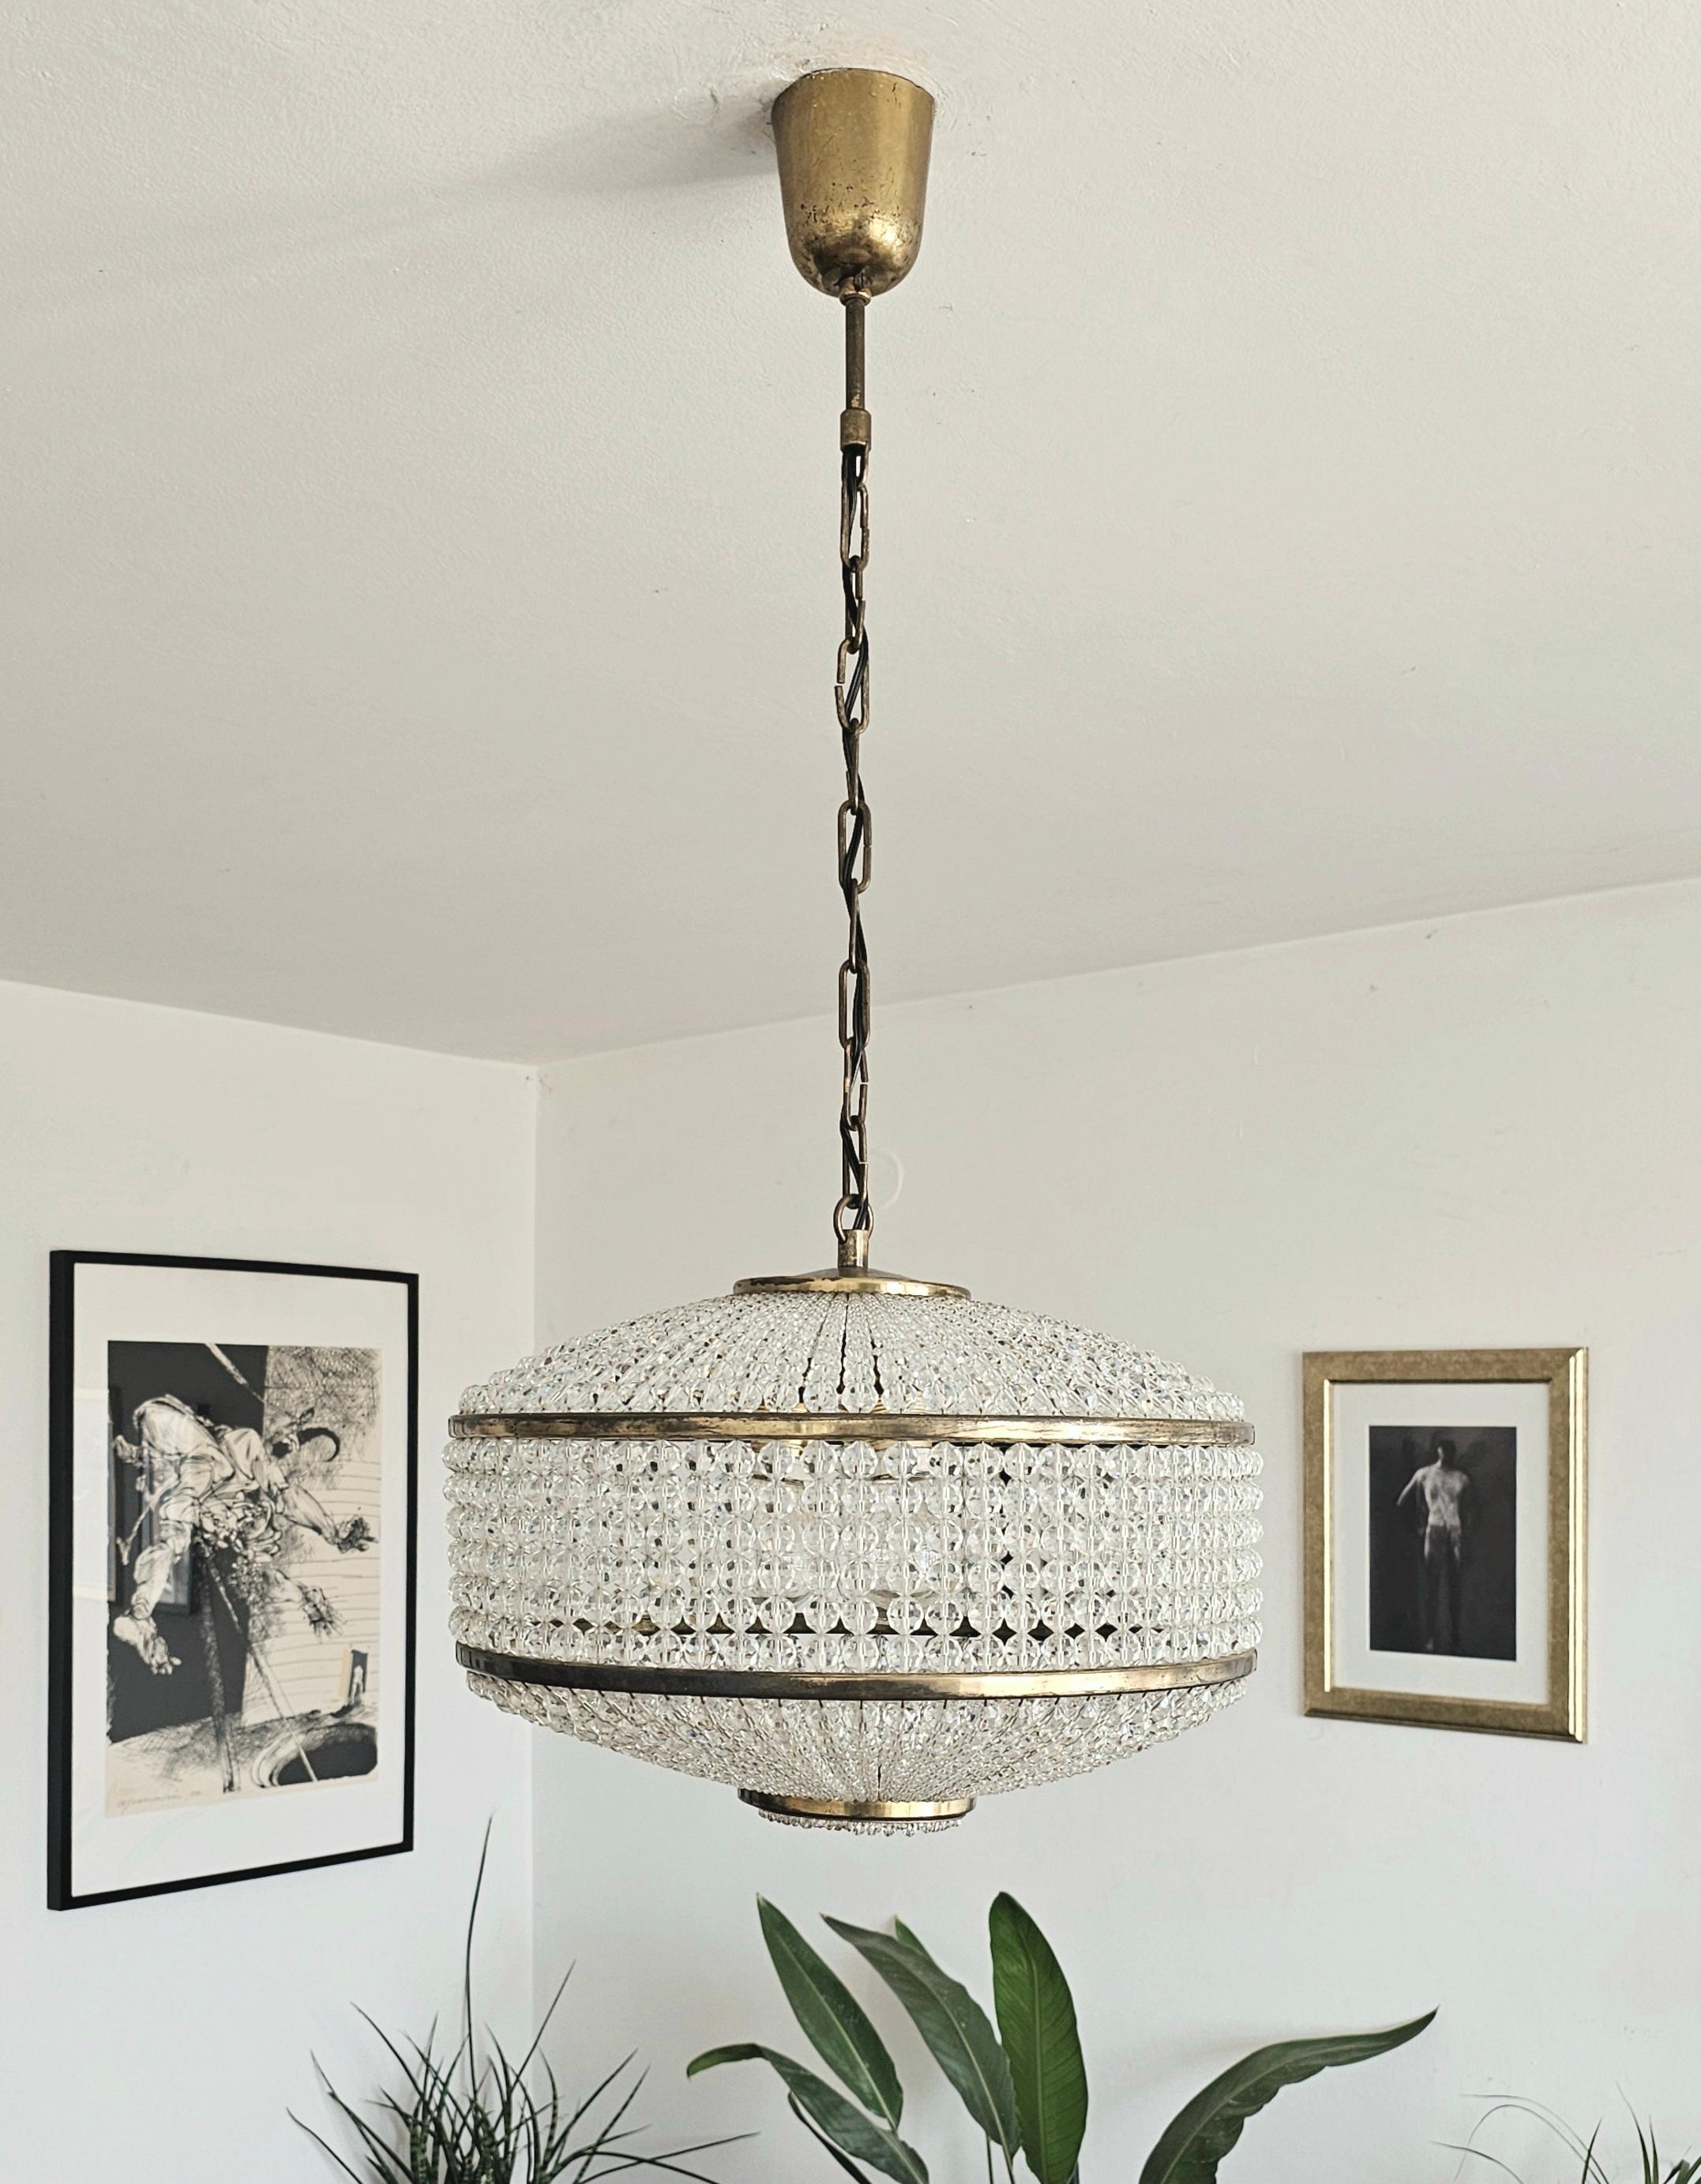 In this listing you will find a gorgeous and very rare Mid Century Modern brass chandelier with by J.L Lobmeyr. It features over 2500 Swarovski crystal beads that, when lit on, create beautiful light and an amazing play of shadows and spark.